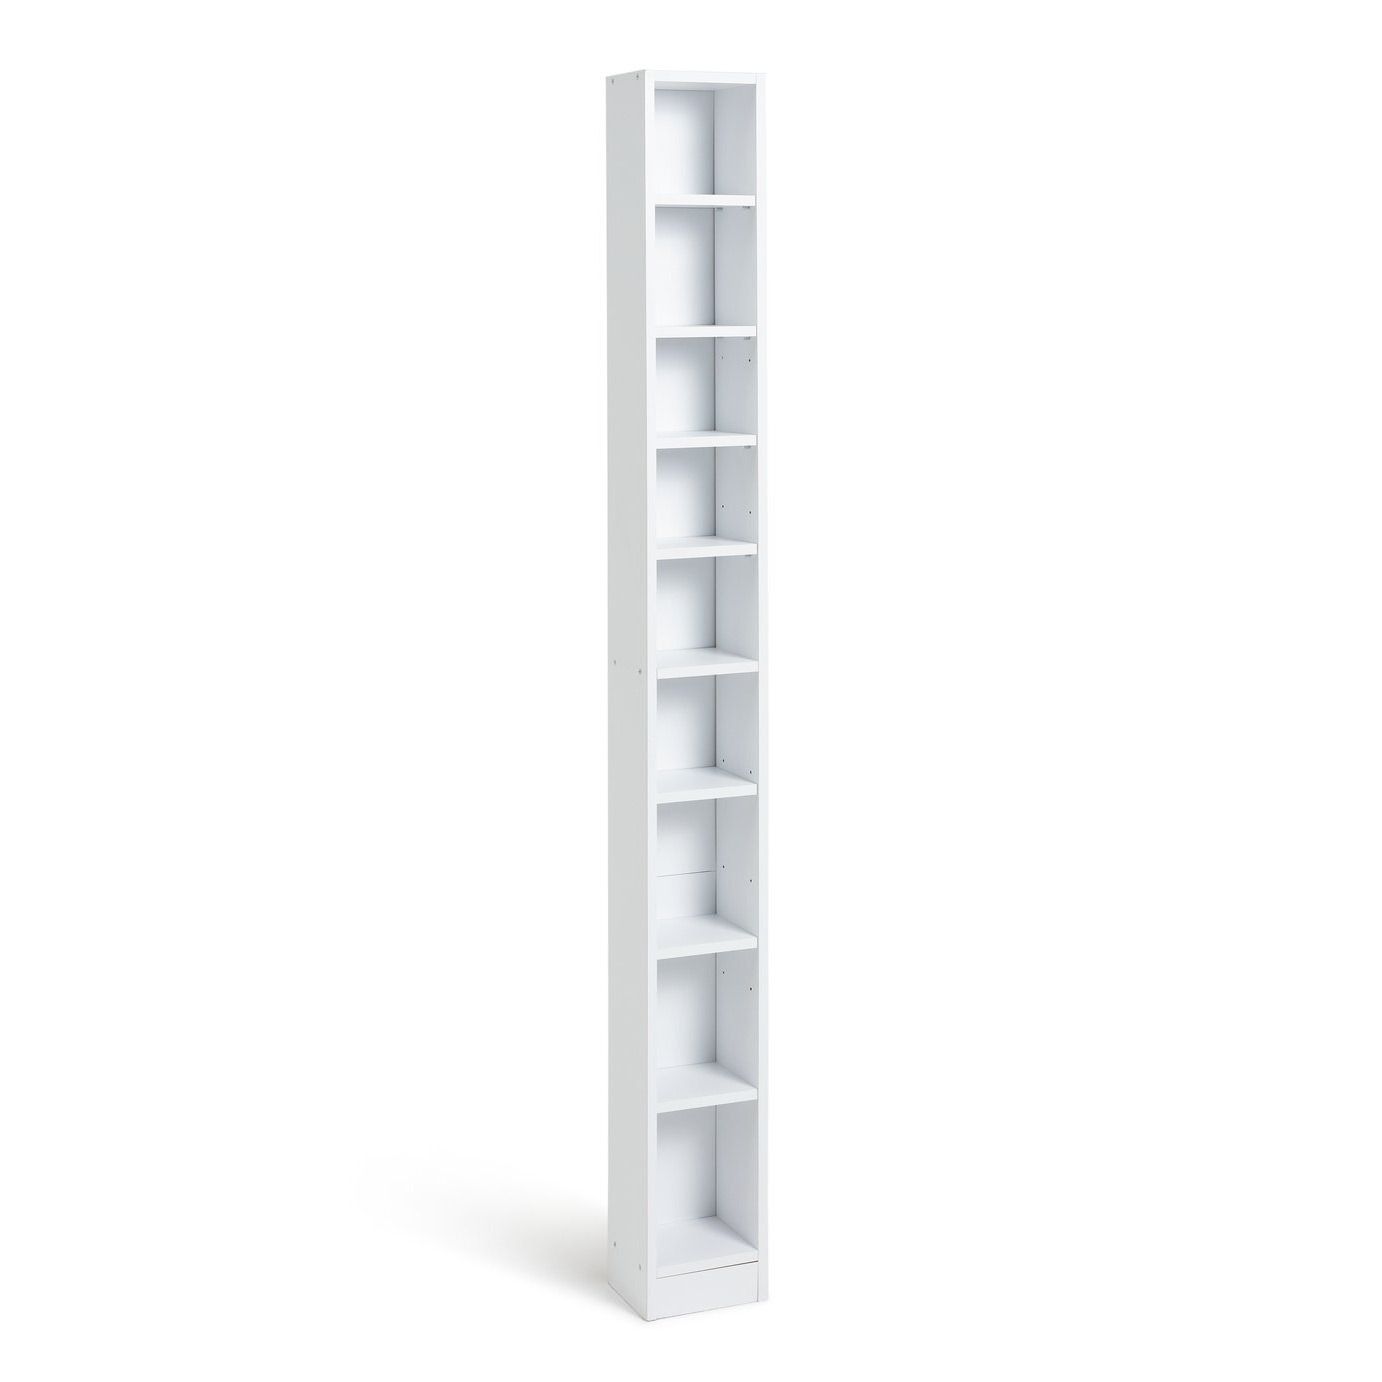 Argos Home Maine Tall CD and DVD Storage unit - White - image 1